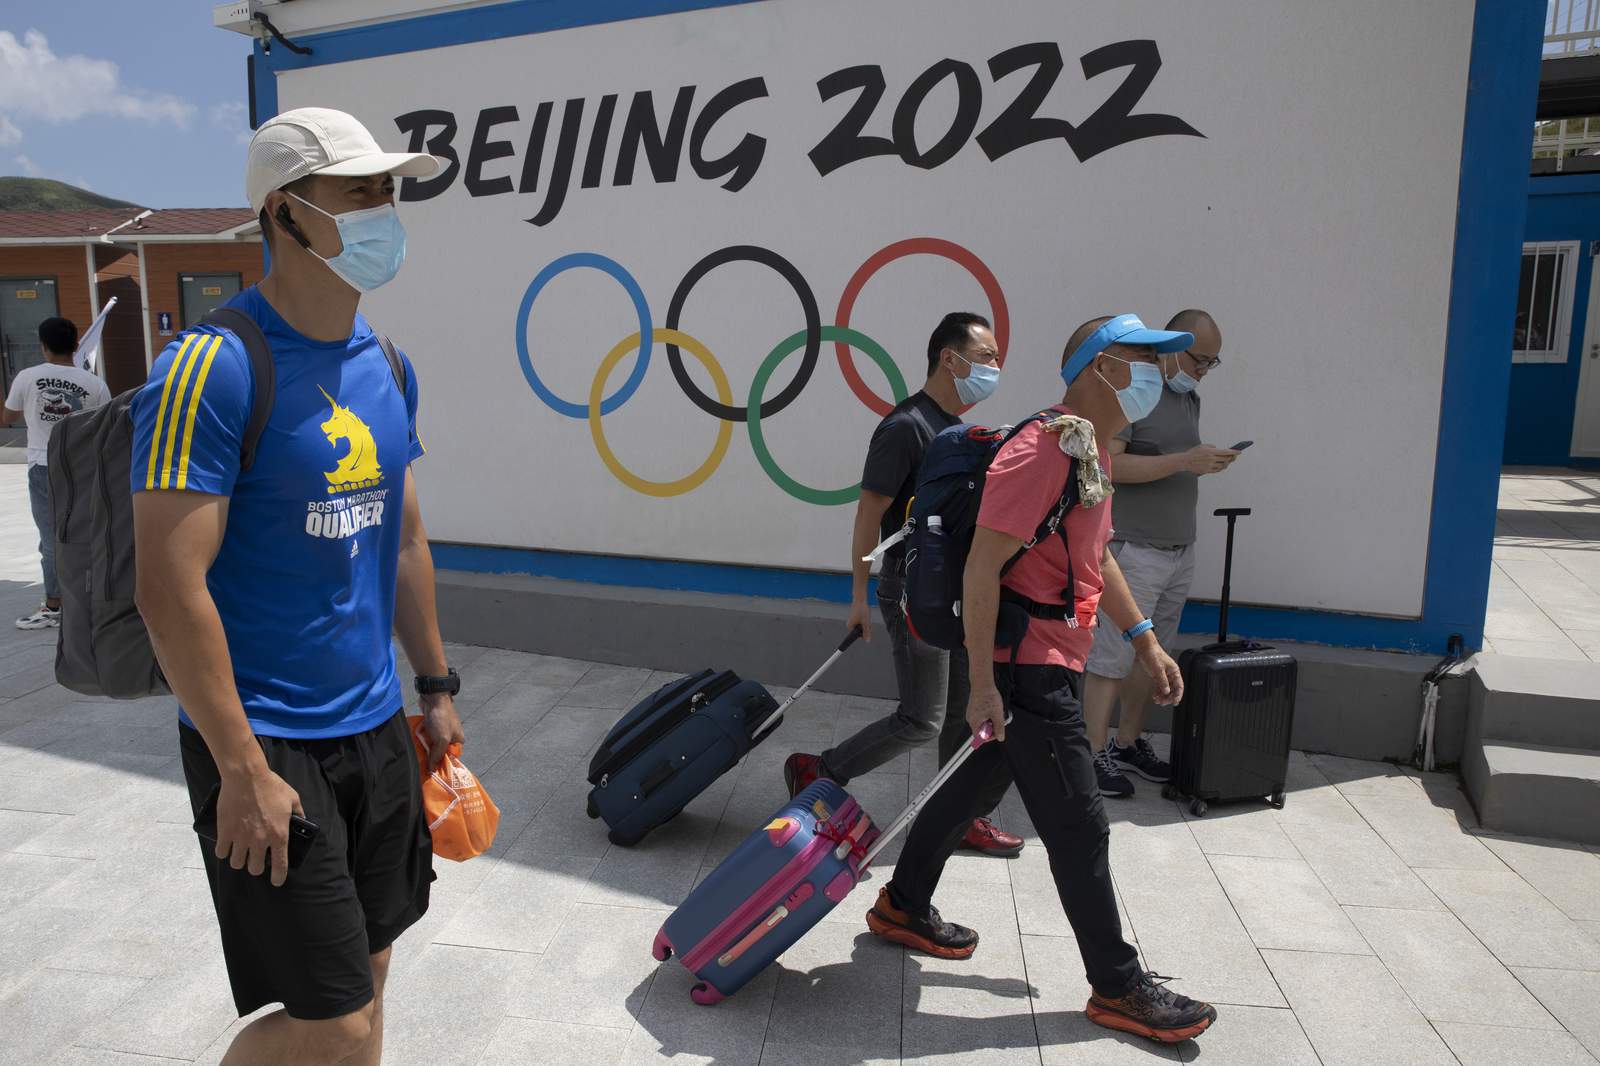 Rights groups call for boycott of Beijing 2022 Winter Games